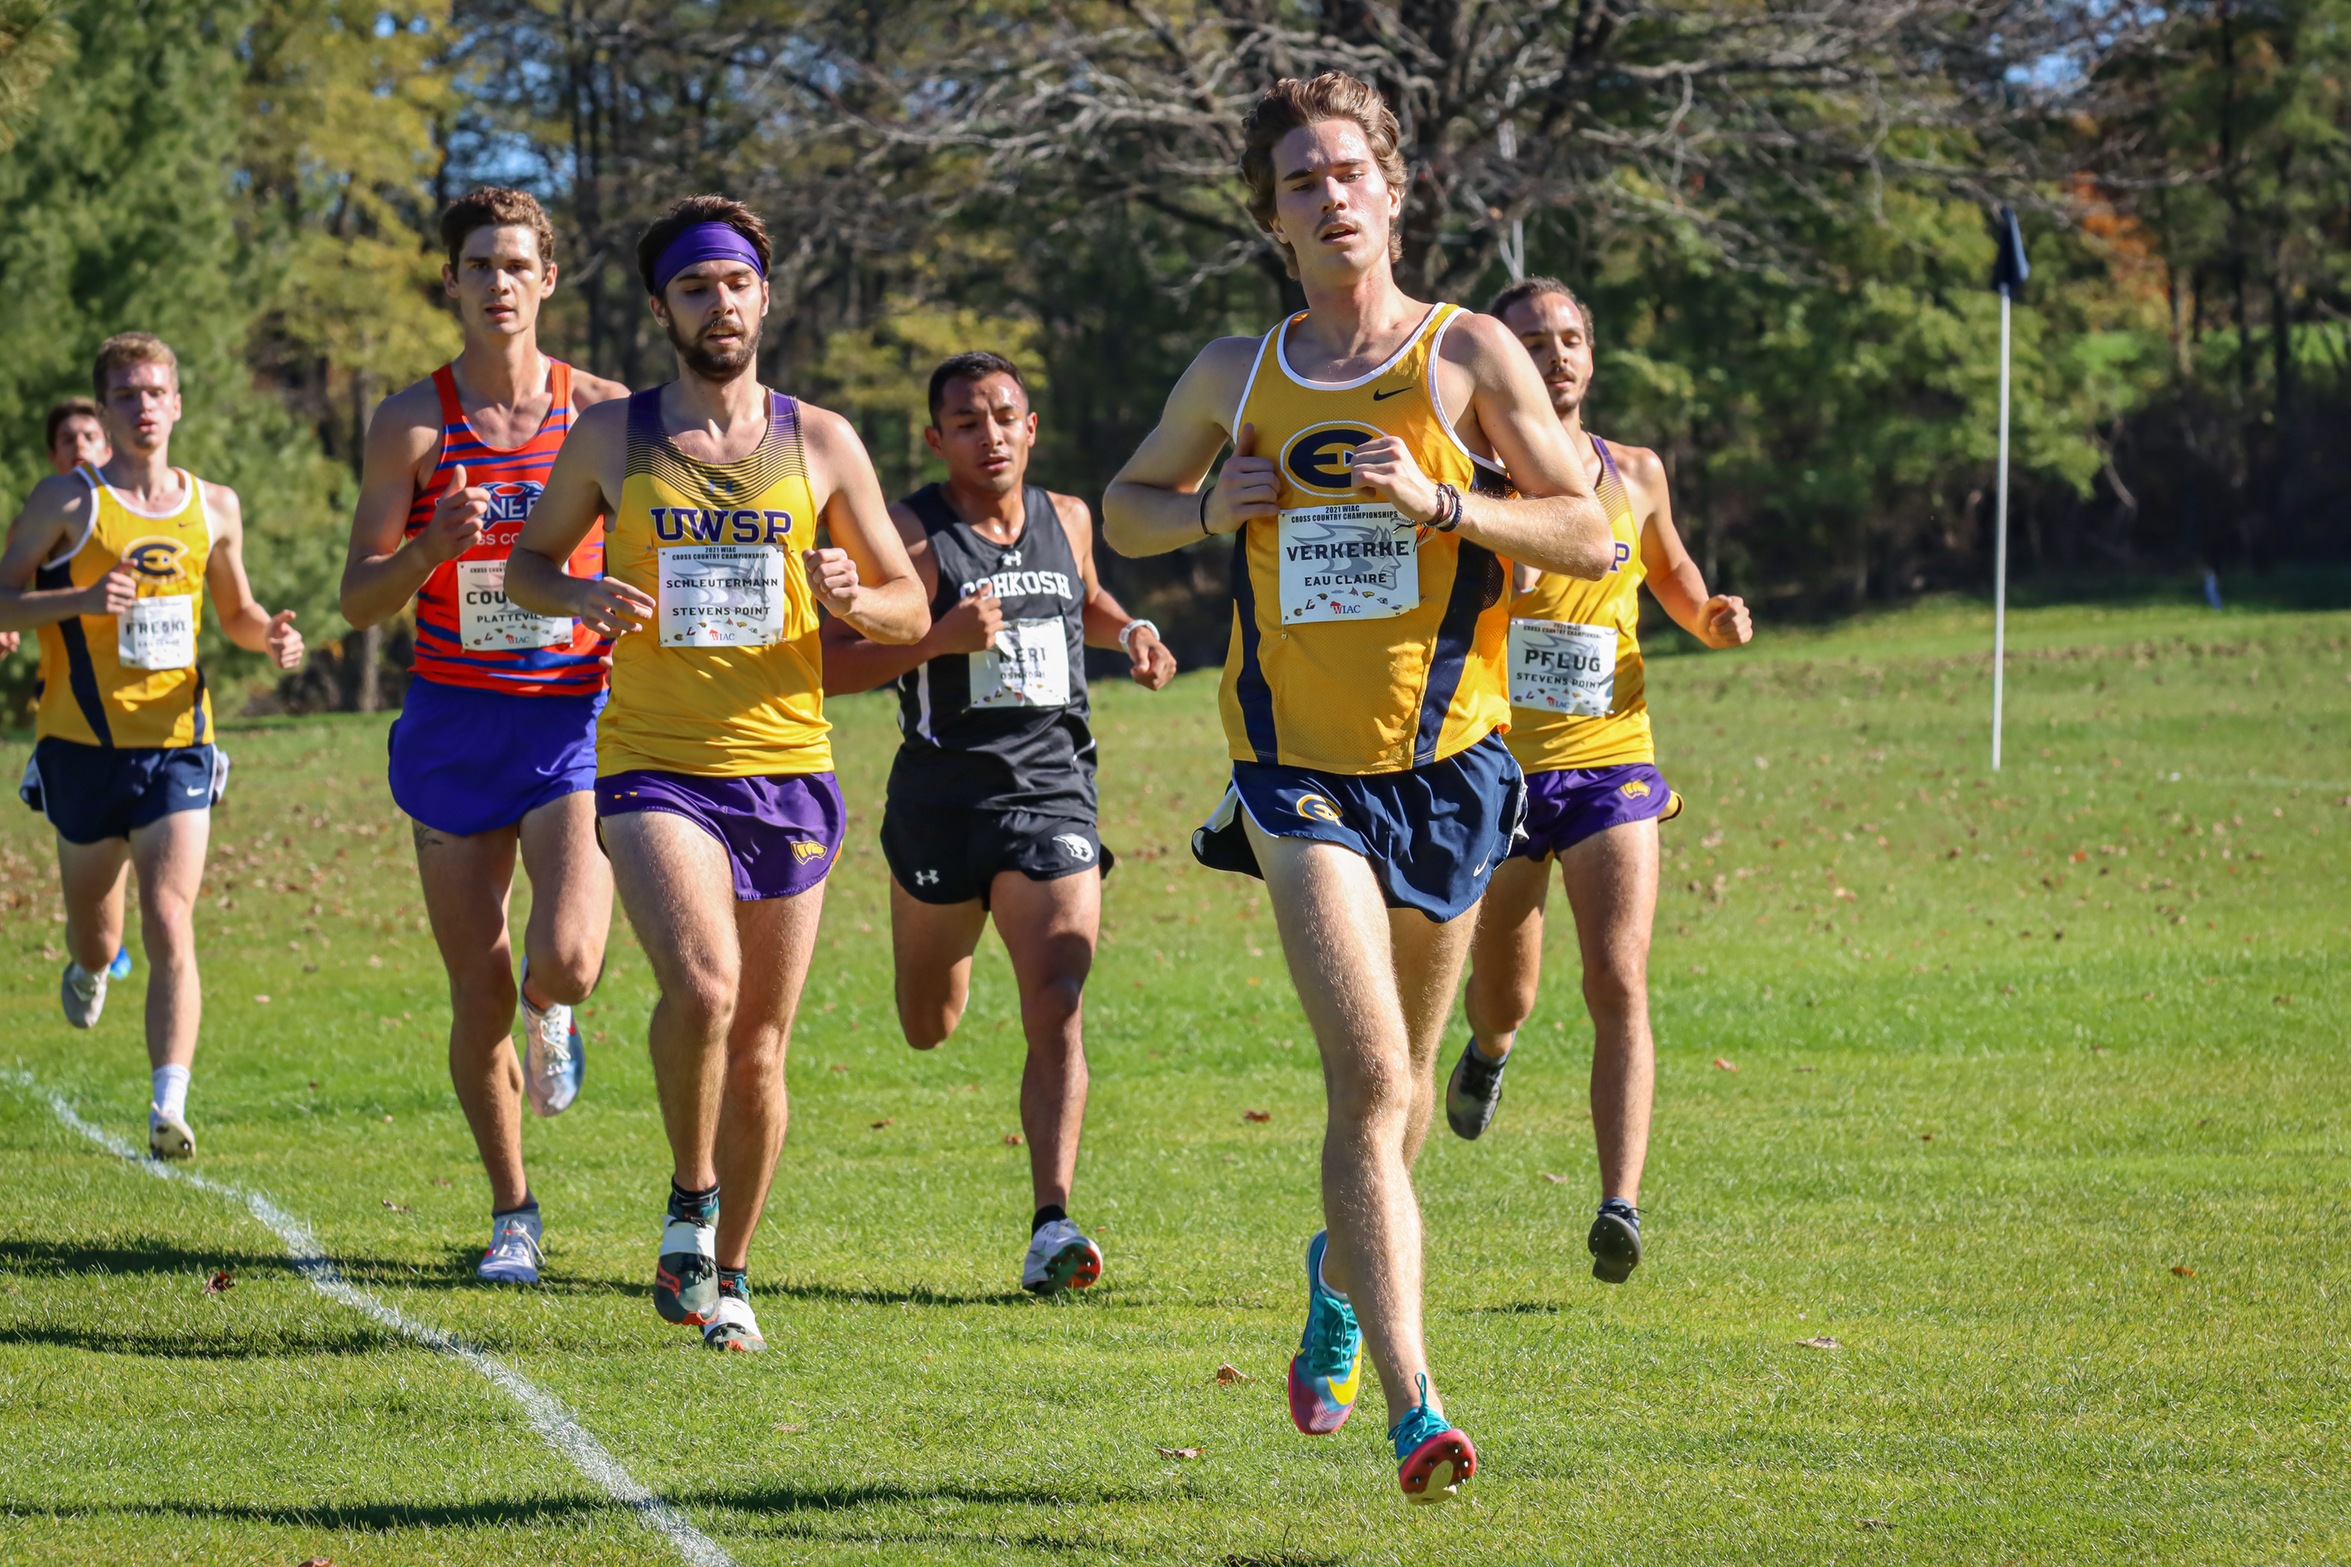 Women’s Cross Country 2nd, Men’s Cross Country 4th at Luther Saga Cup